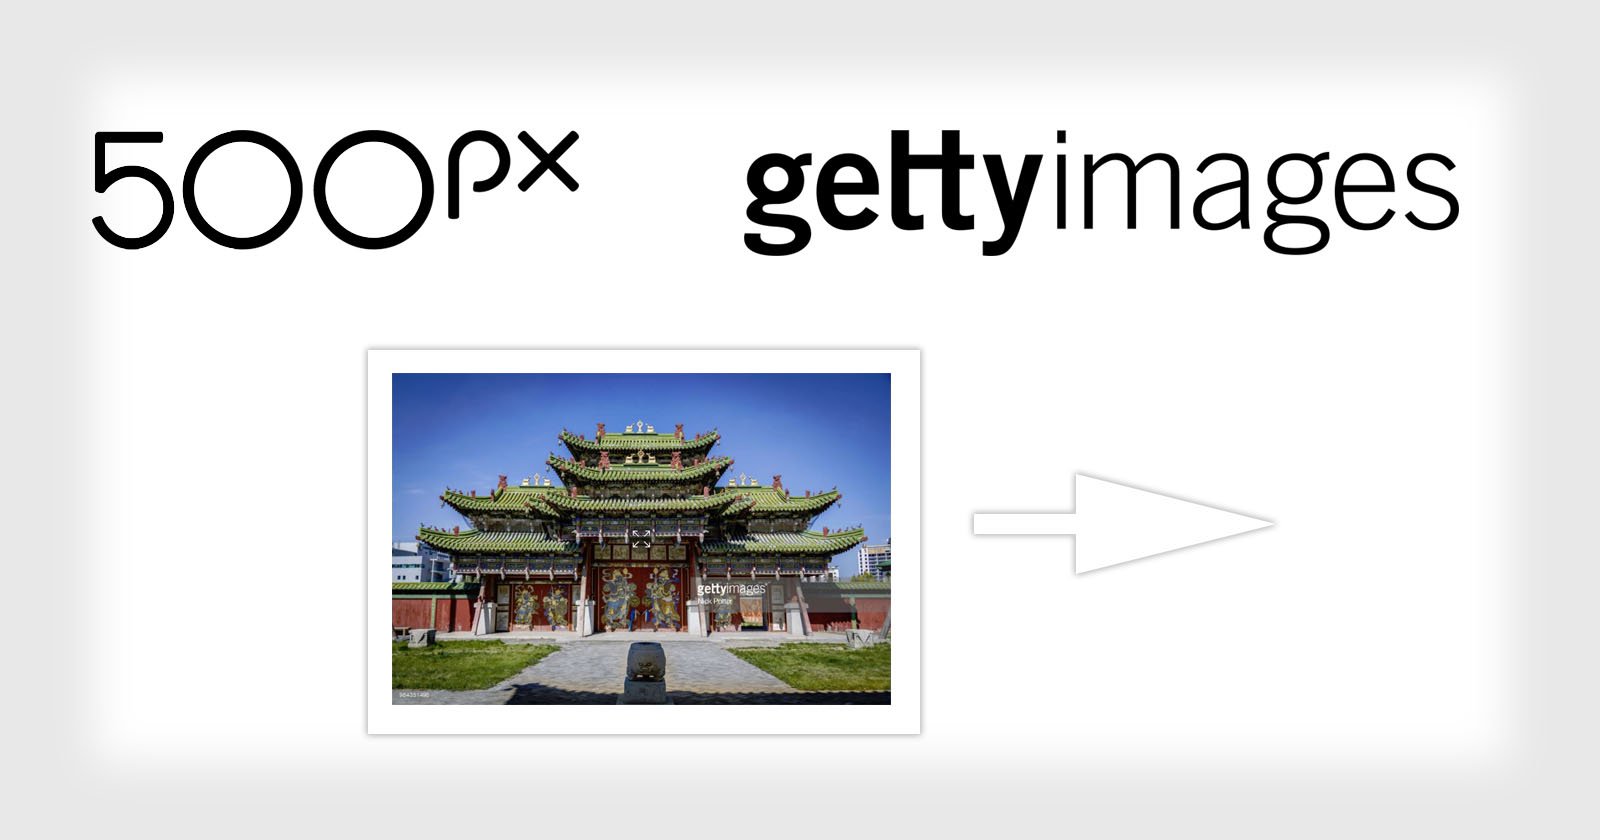 I Opted Out at 500px But Getty Images is Selling My Photos Anyway